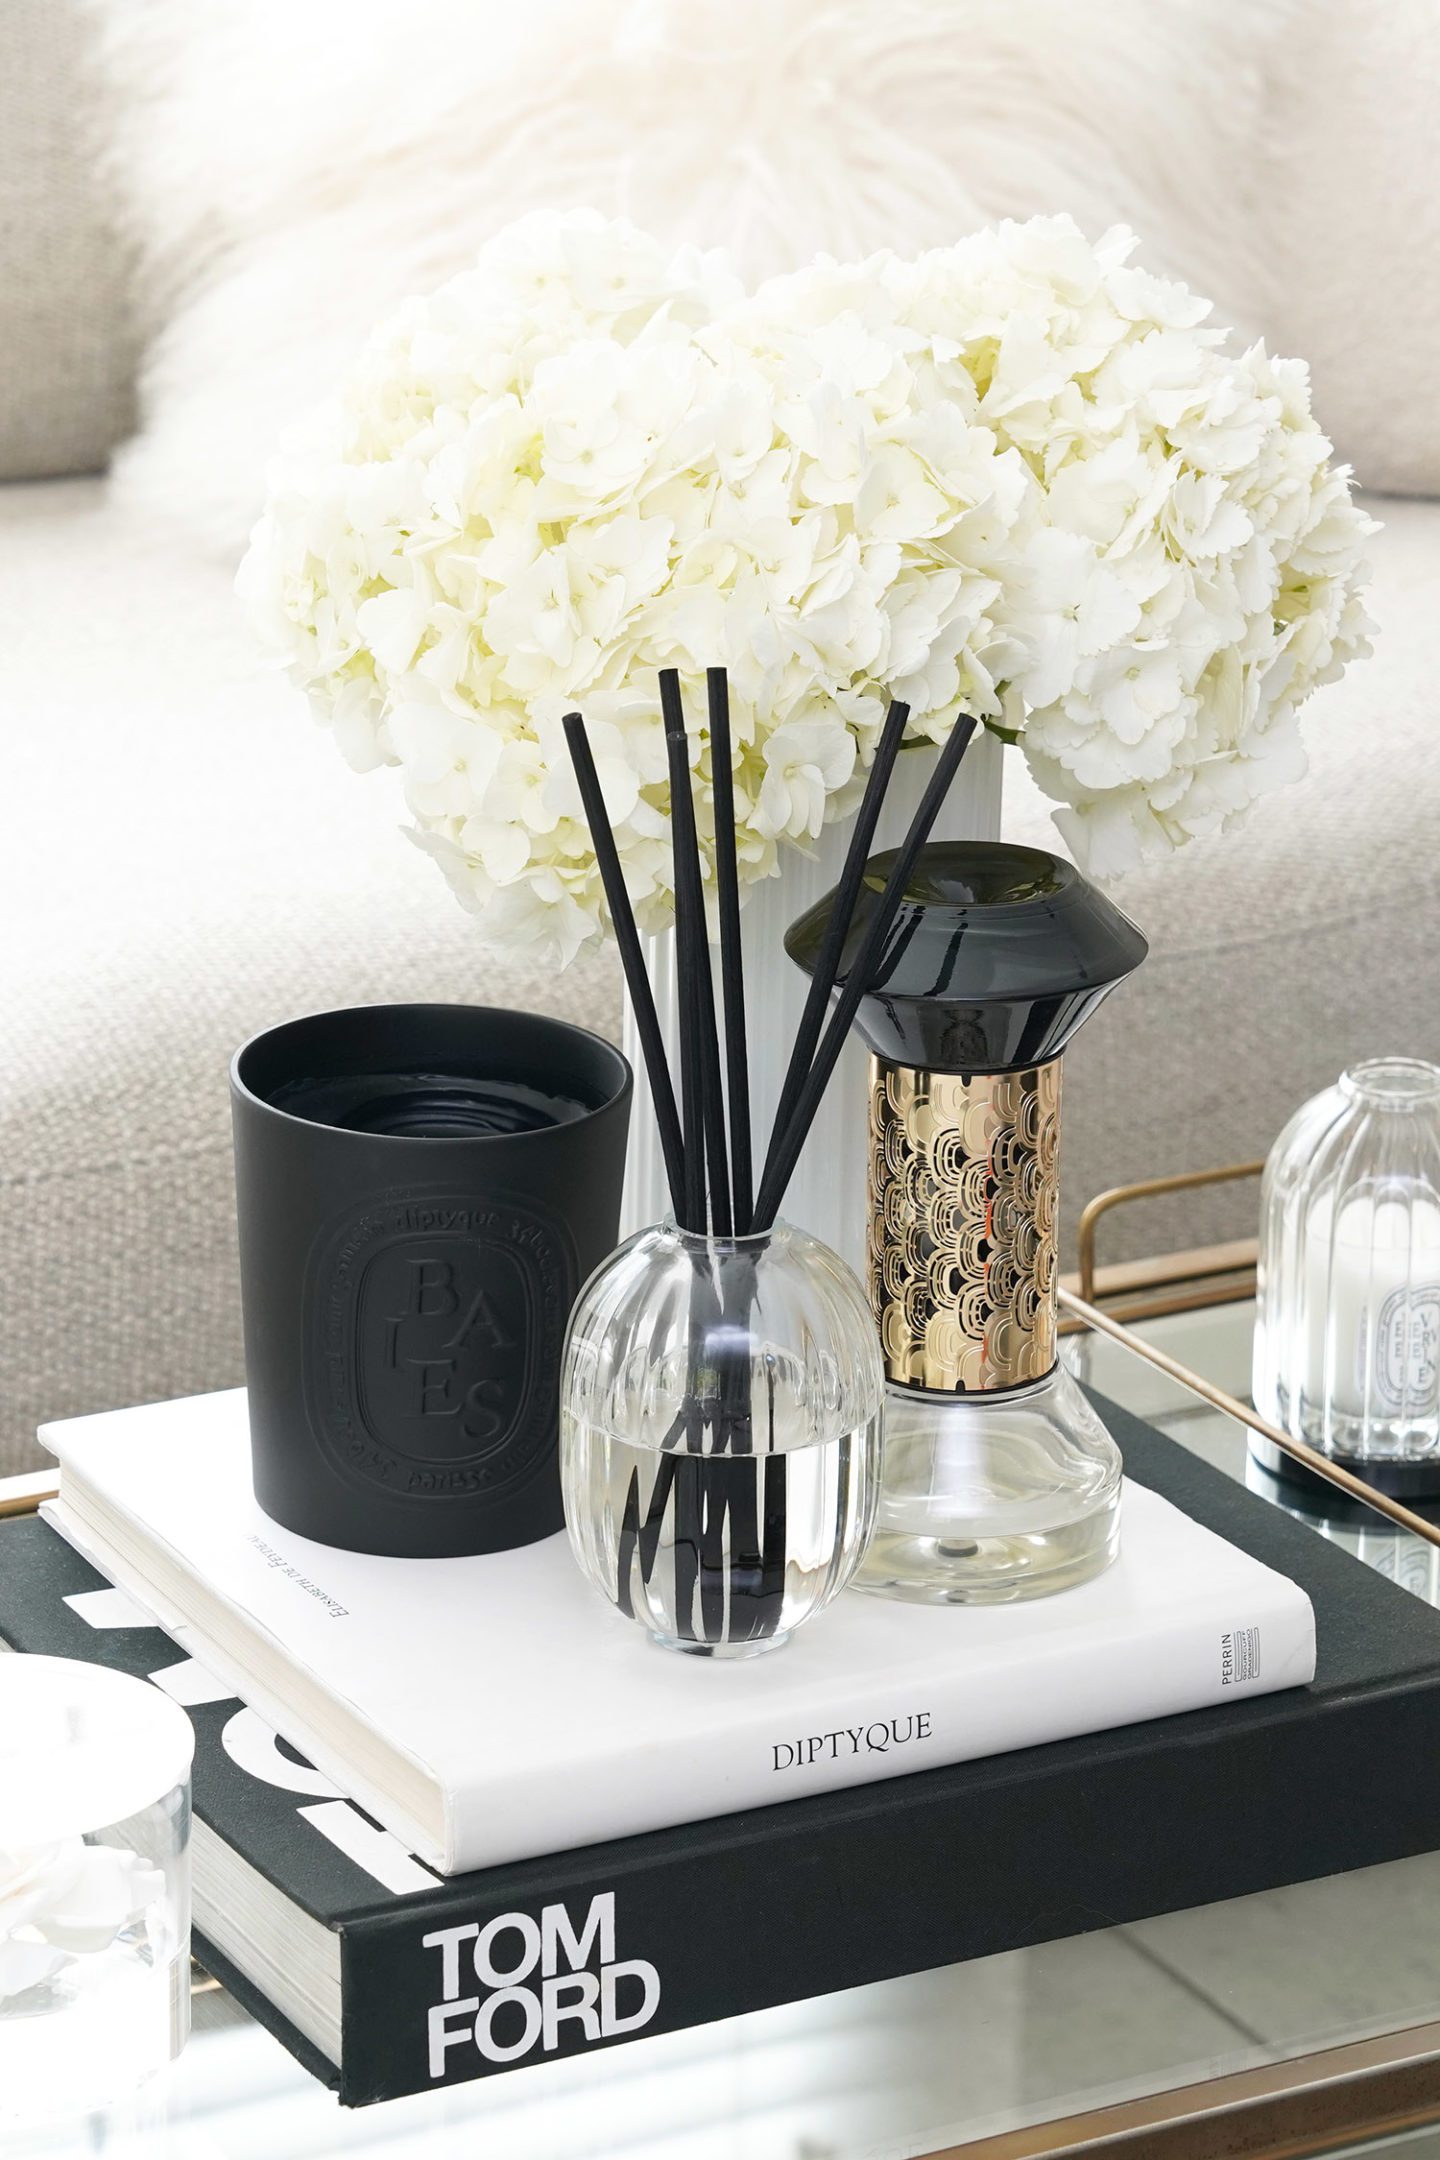 Diptyque Baies Large Candle, Reed Diffuser and Hourglass Diffuser